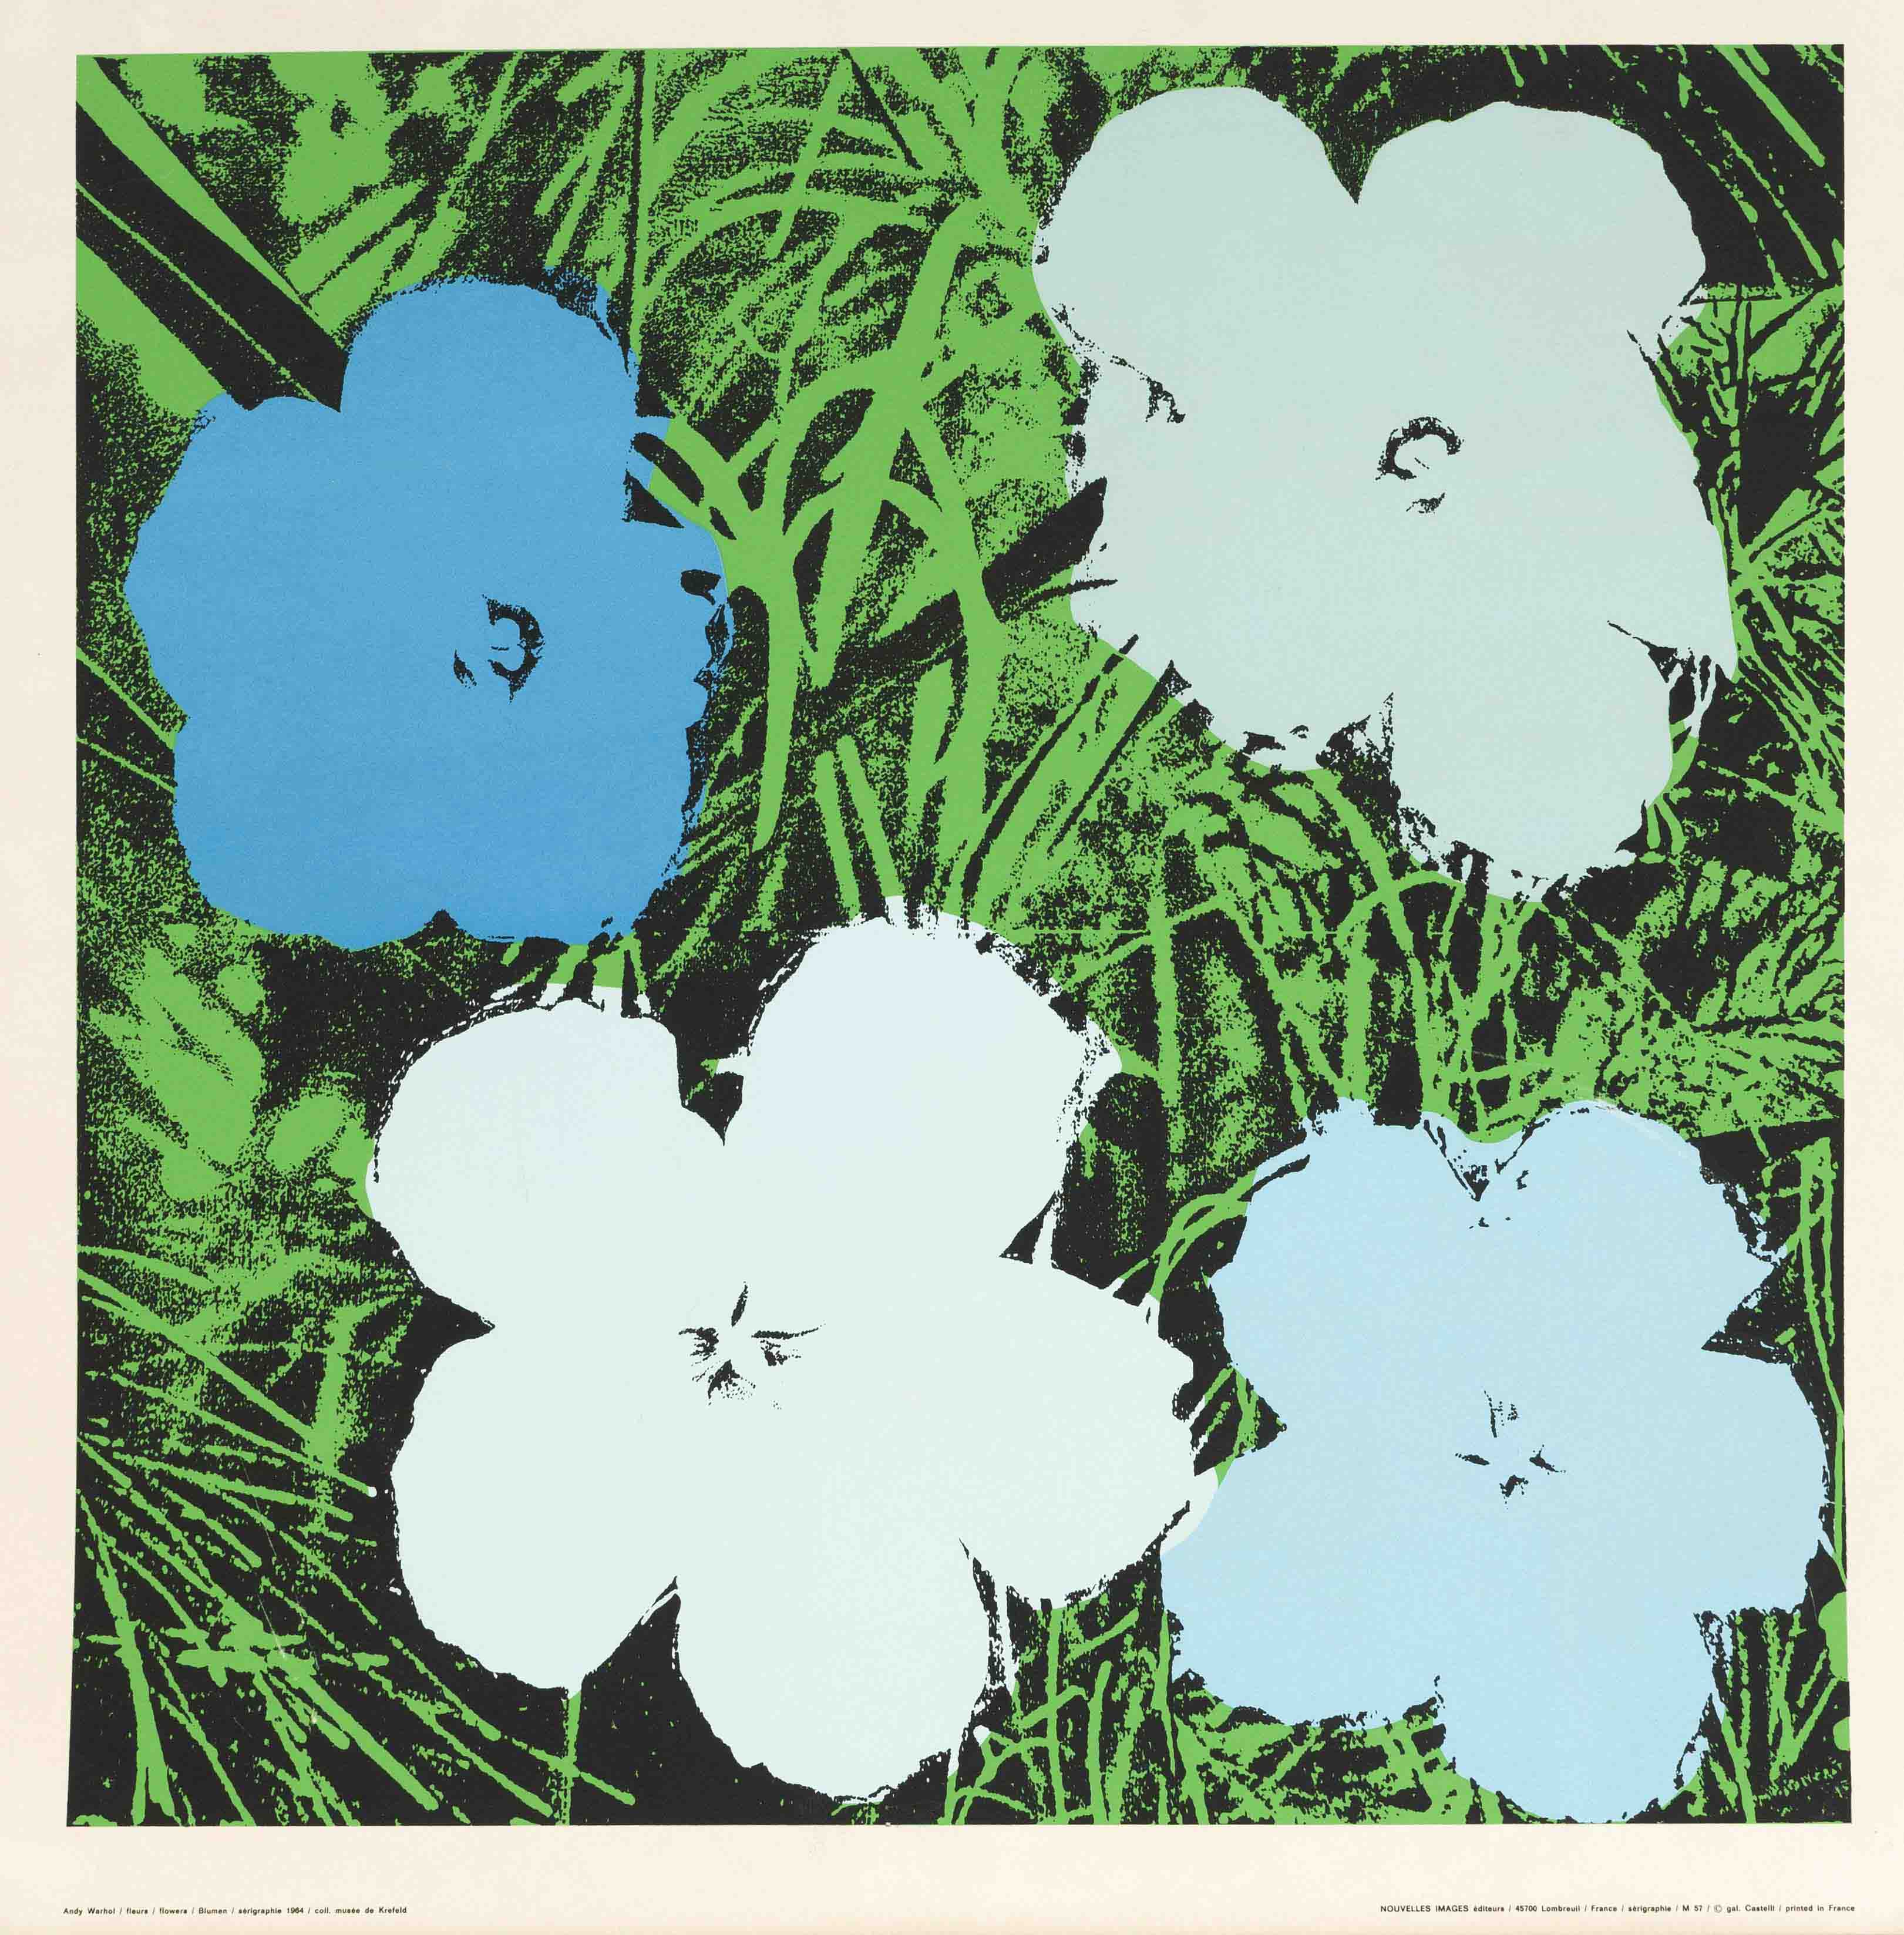 Andy Warhol (1928-1987), after, Fleurs/ Flowers, 1964, color silkscreen on wove paper,